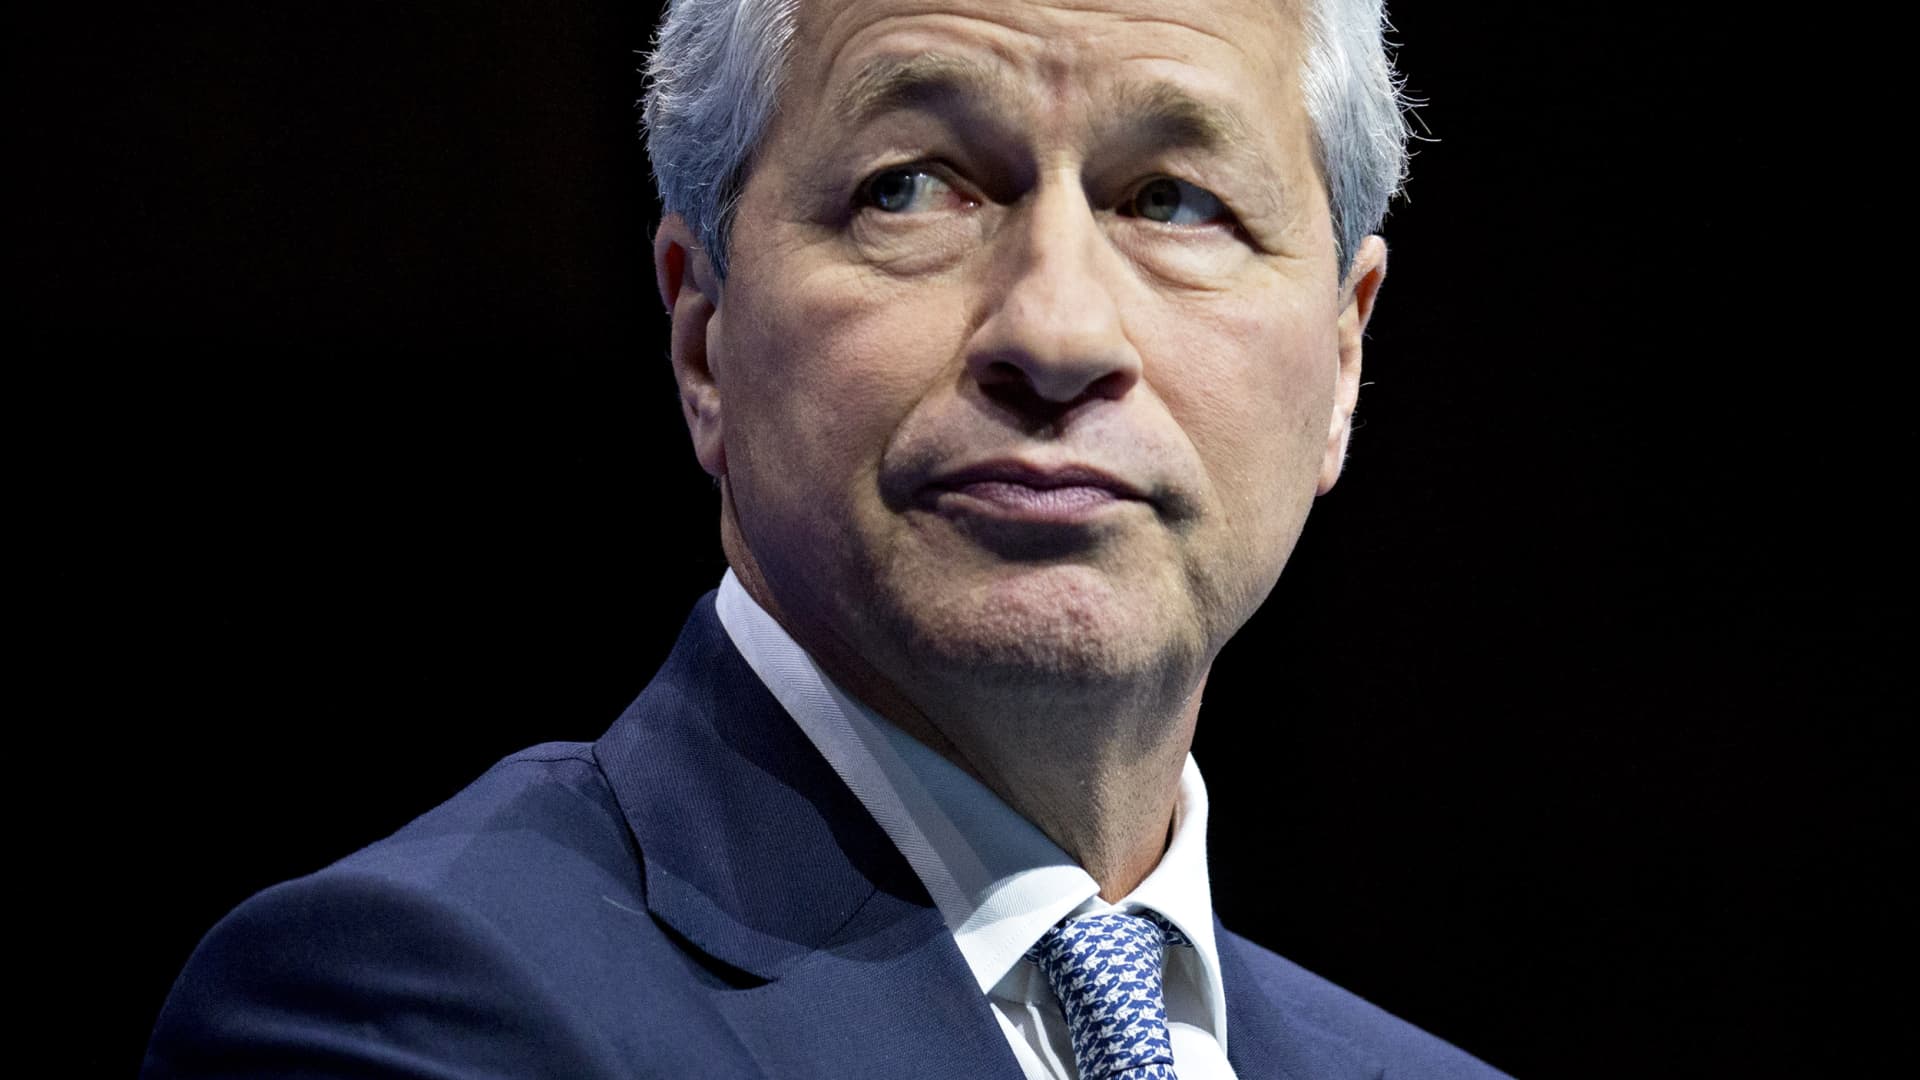 From Jamie Dimon's CEO Inception to Today: A $1,000 Investment in JPMorgan Reveals Astonishing Growth